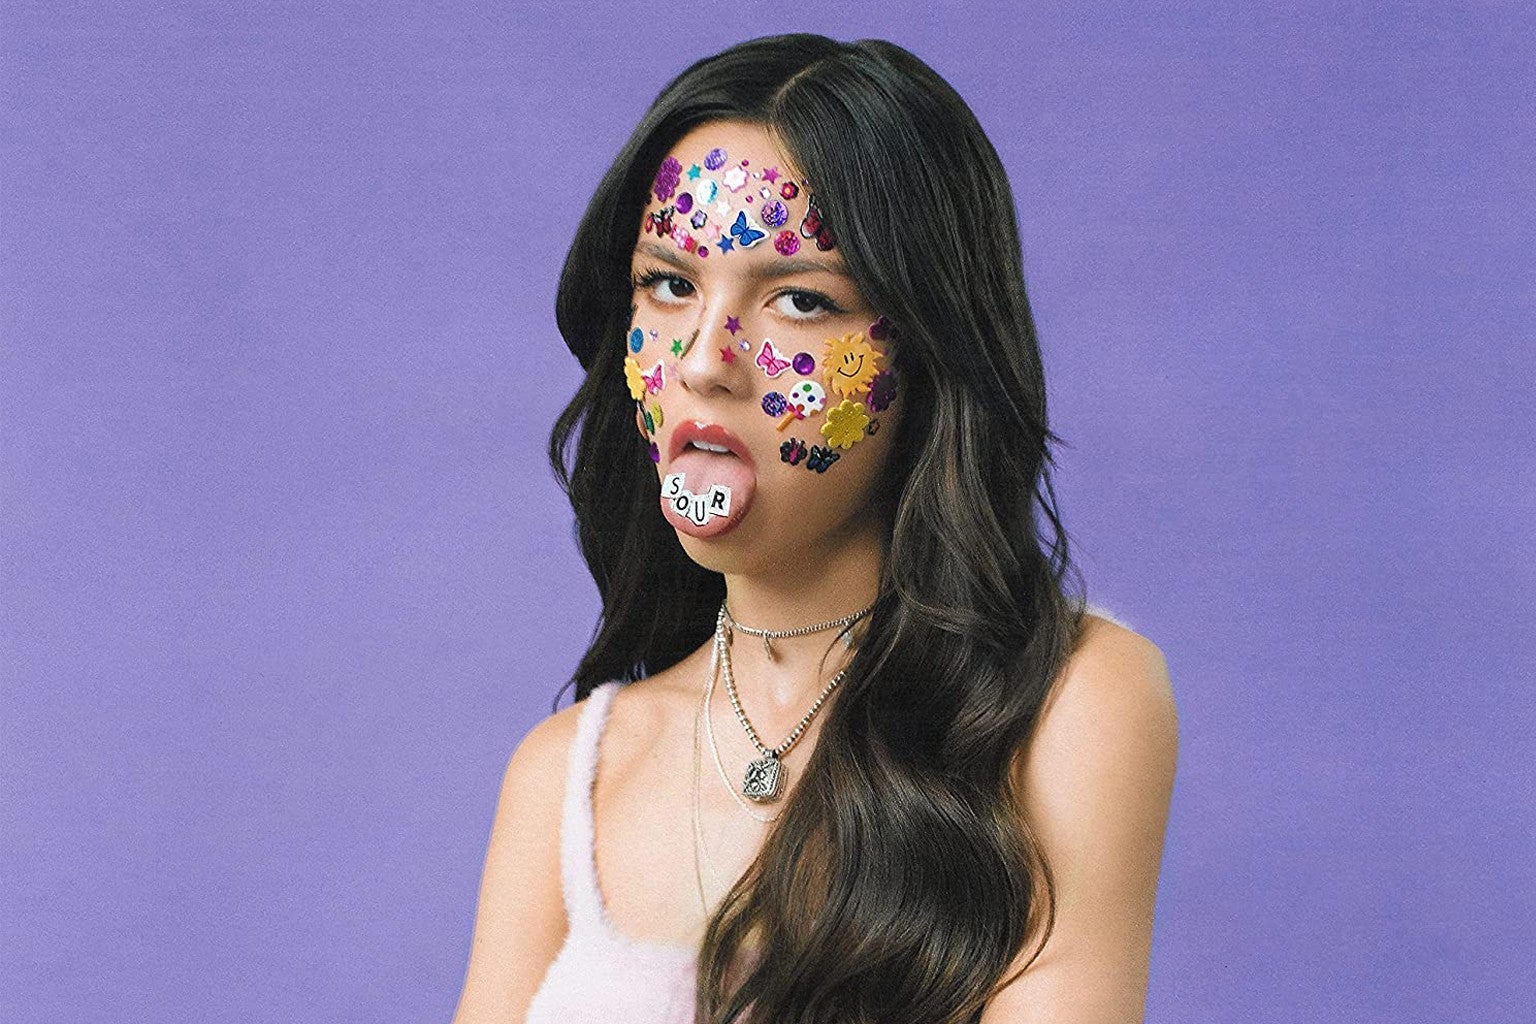 A woman with long brown hair and a white tank top stares at the camera with her tongue out. She has multicolored stickers all over her face and stickers that spell out the word SOUR on her tongue.